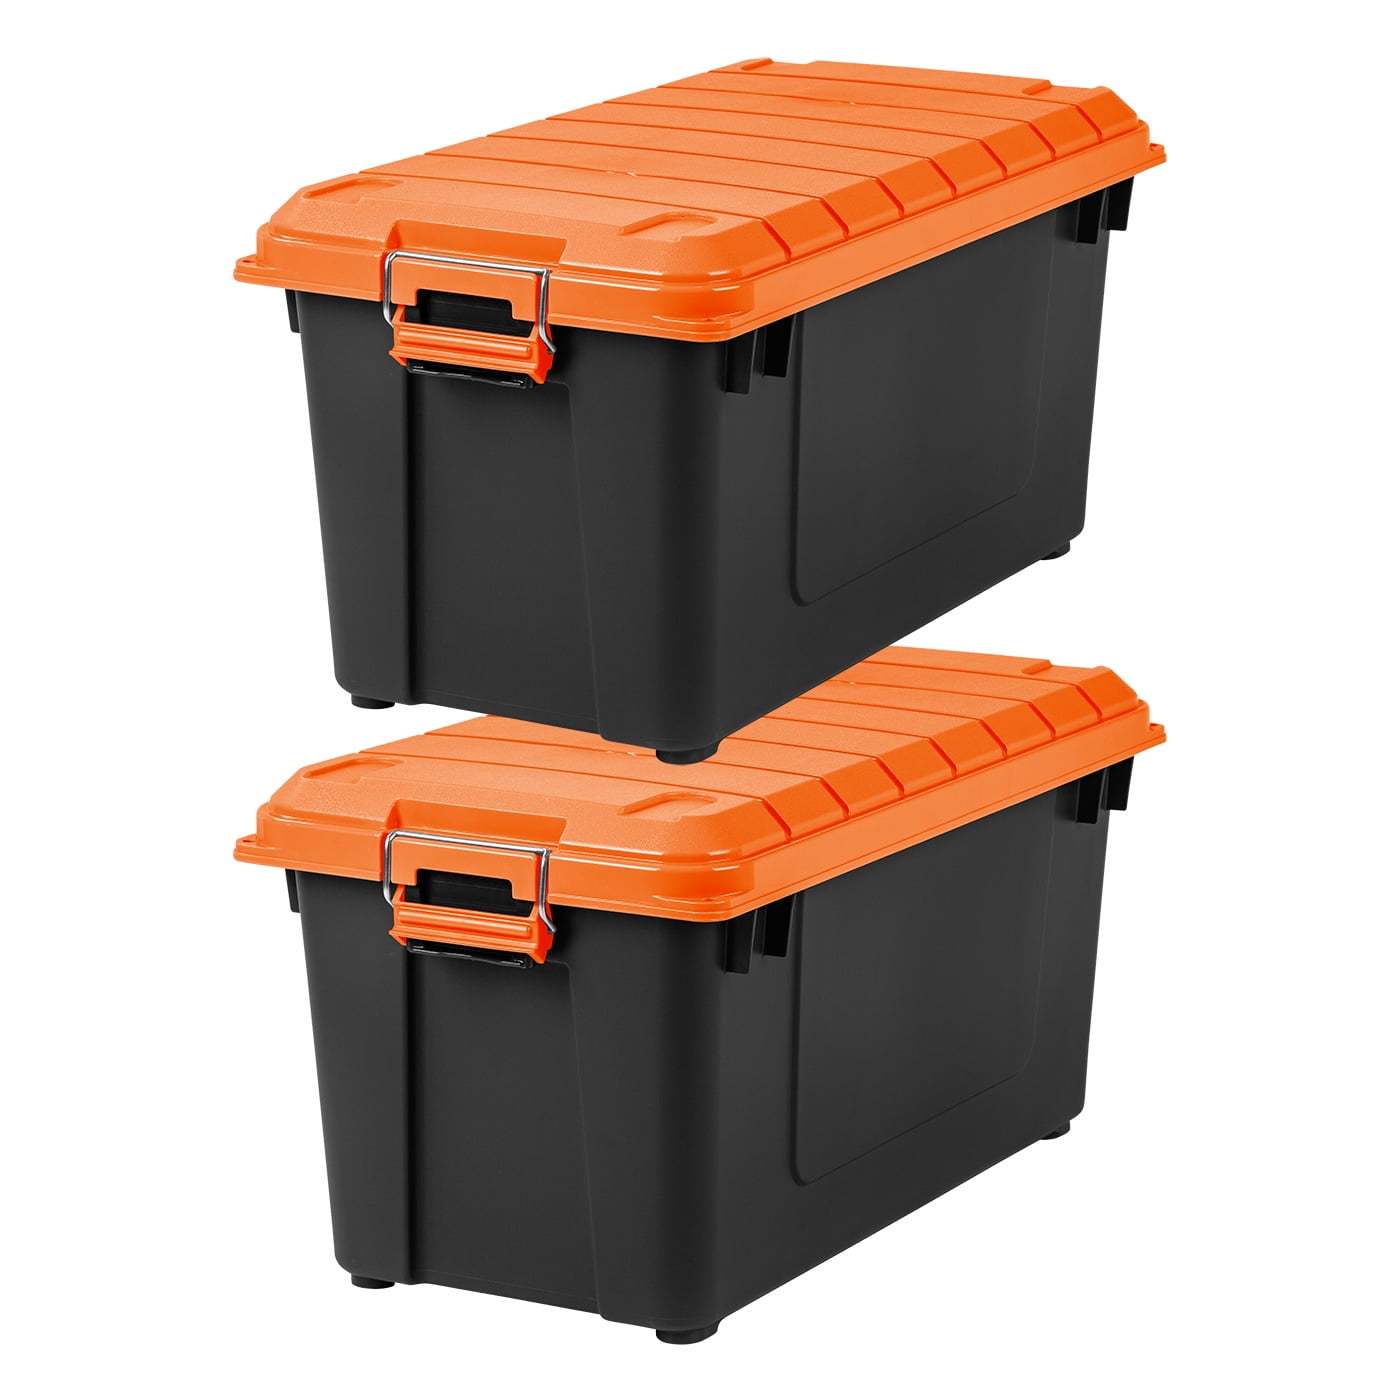 Used Tote Boxes For Sale - From £4.20 New Tote Boxes For Sale